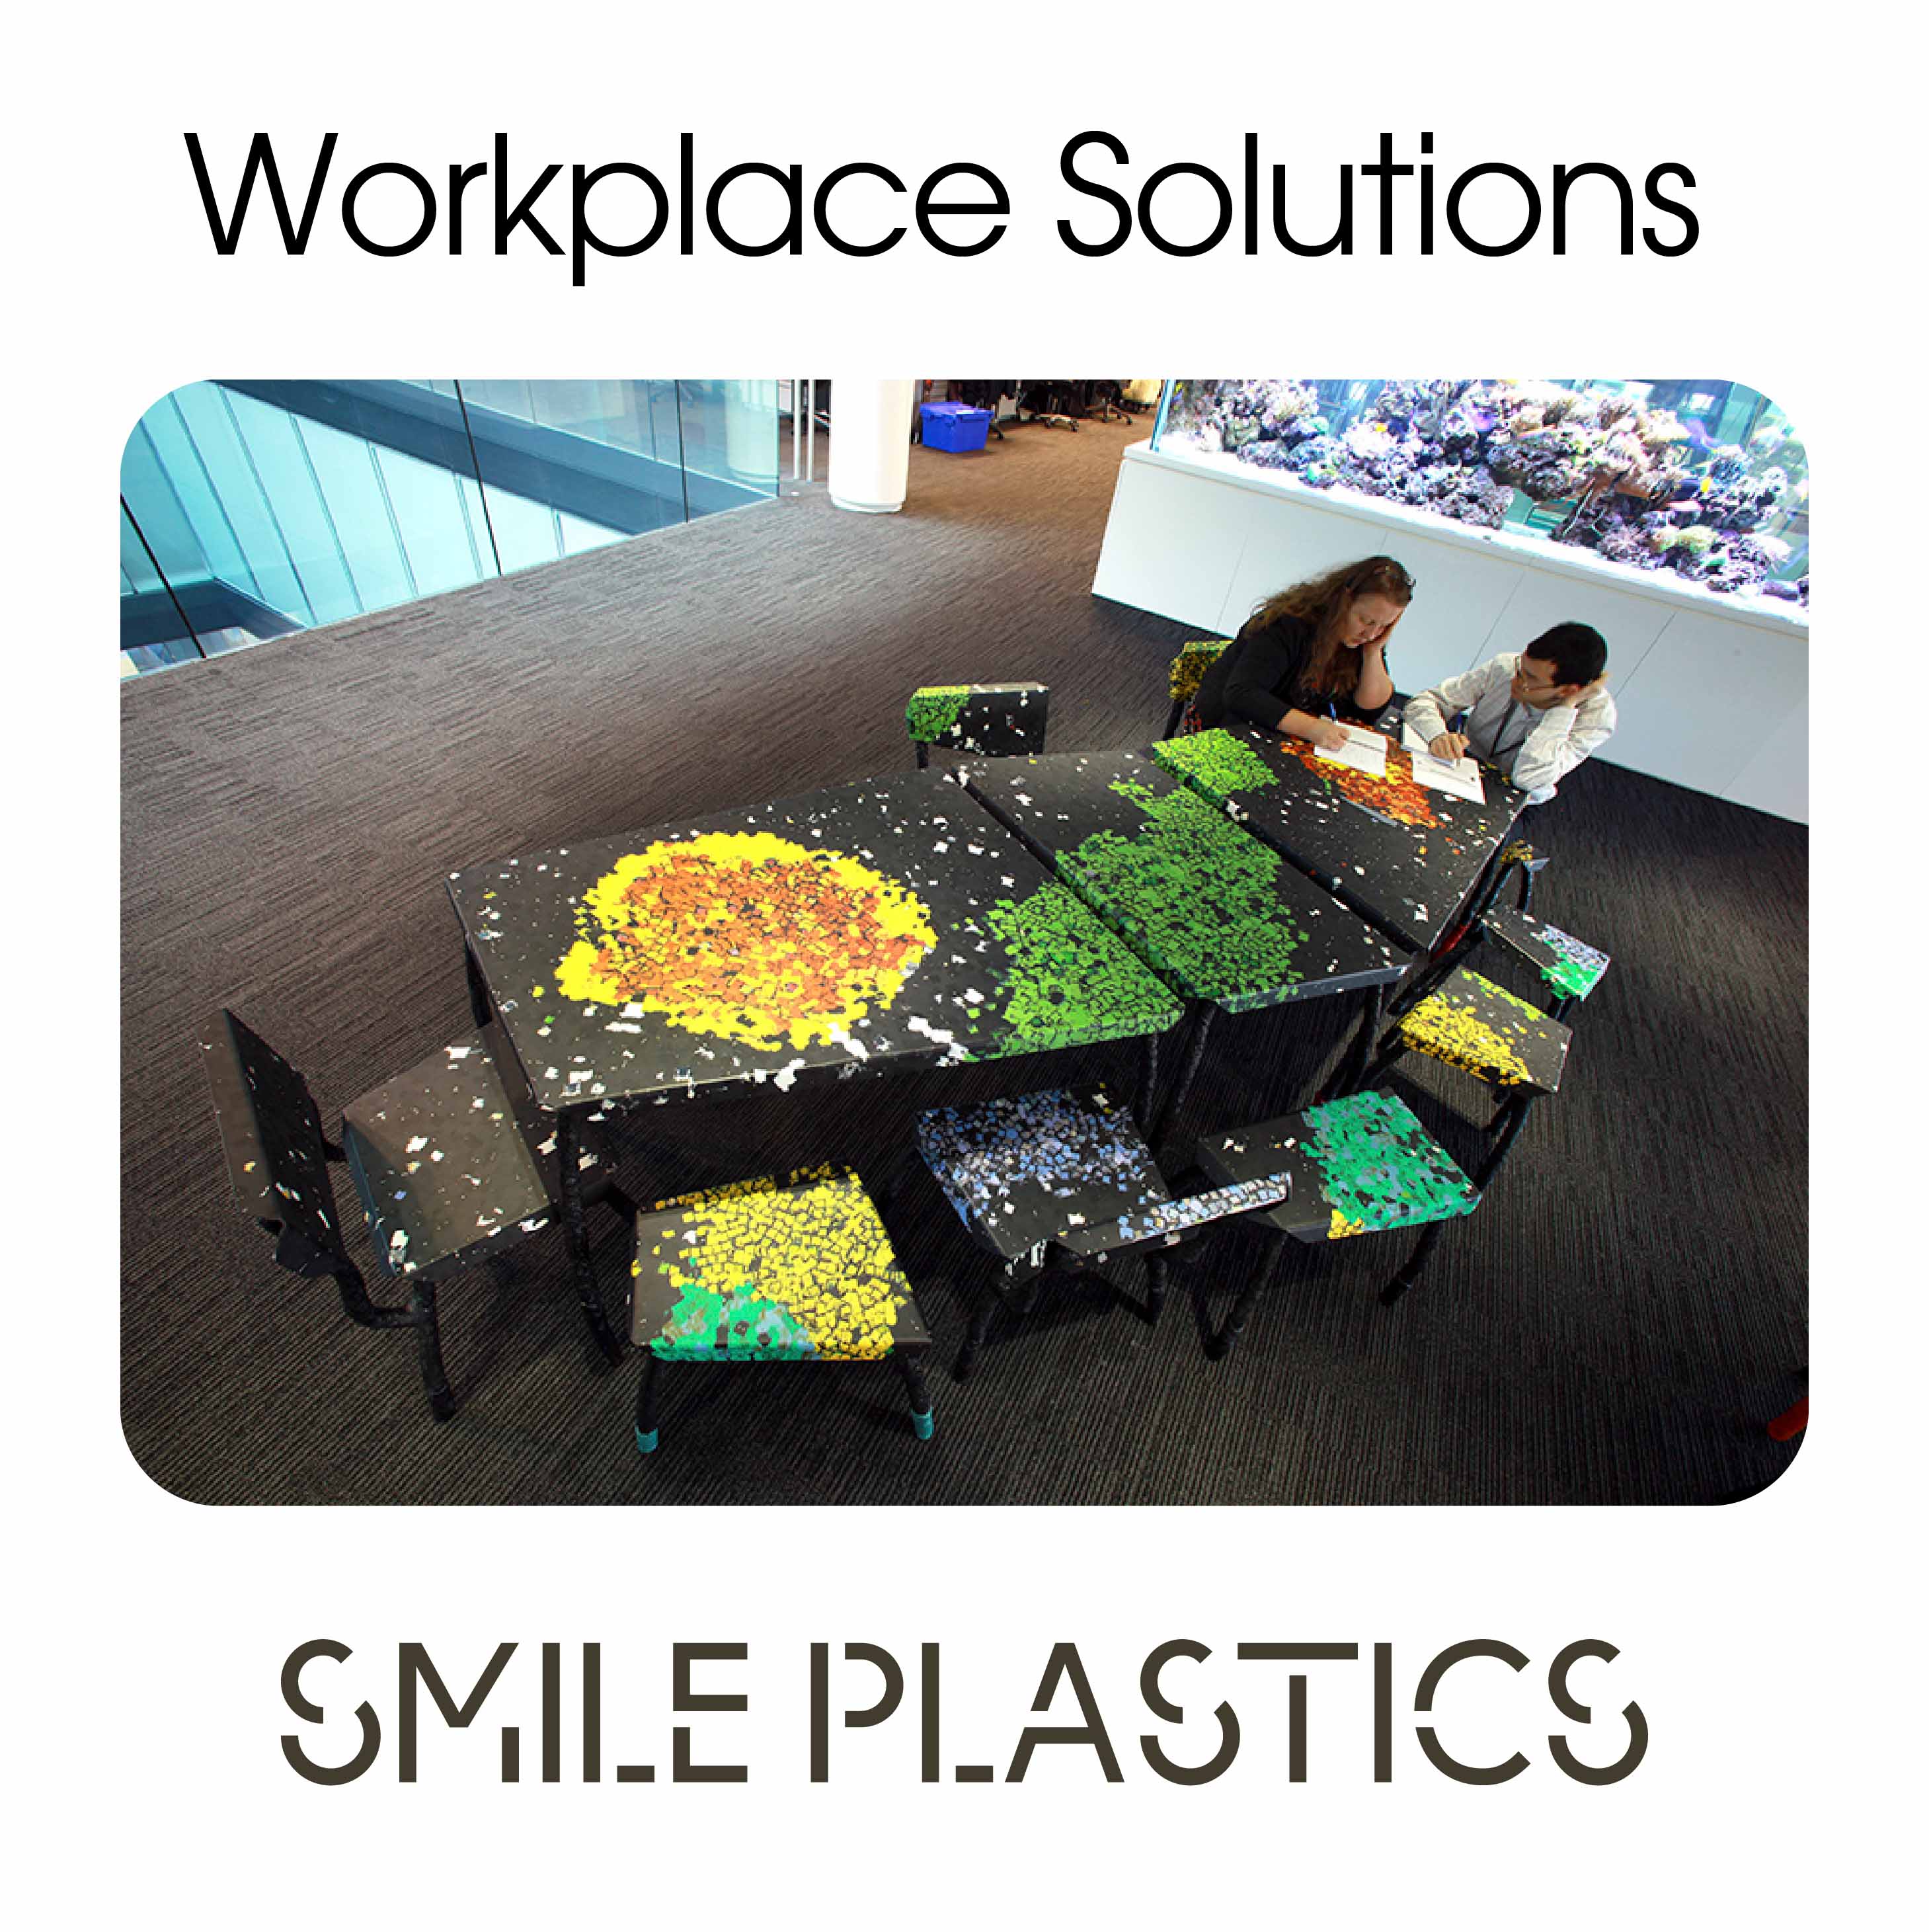 Workplace Solutions | Smile Plastics - Mottled recycled surfaces